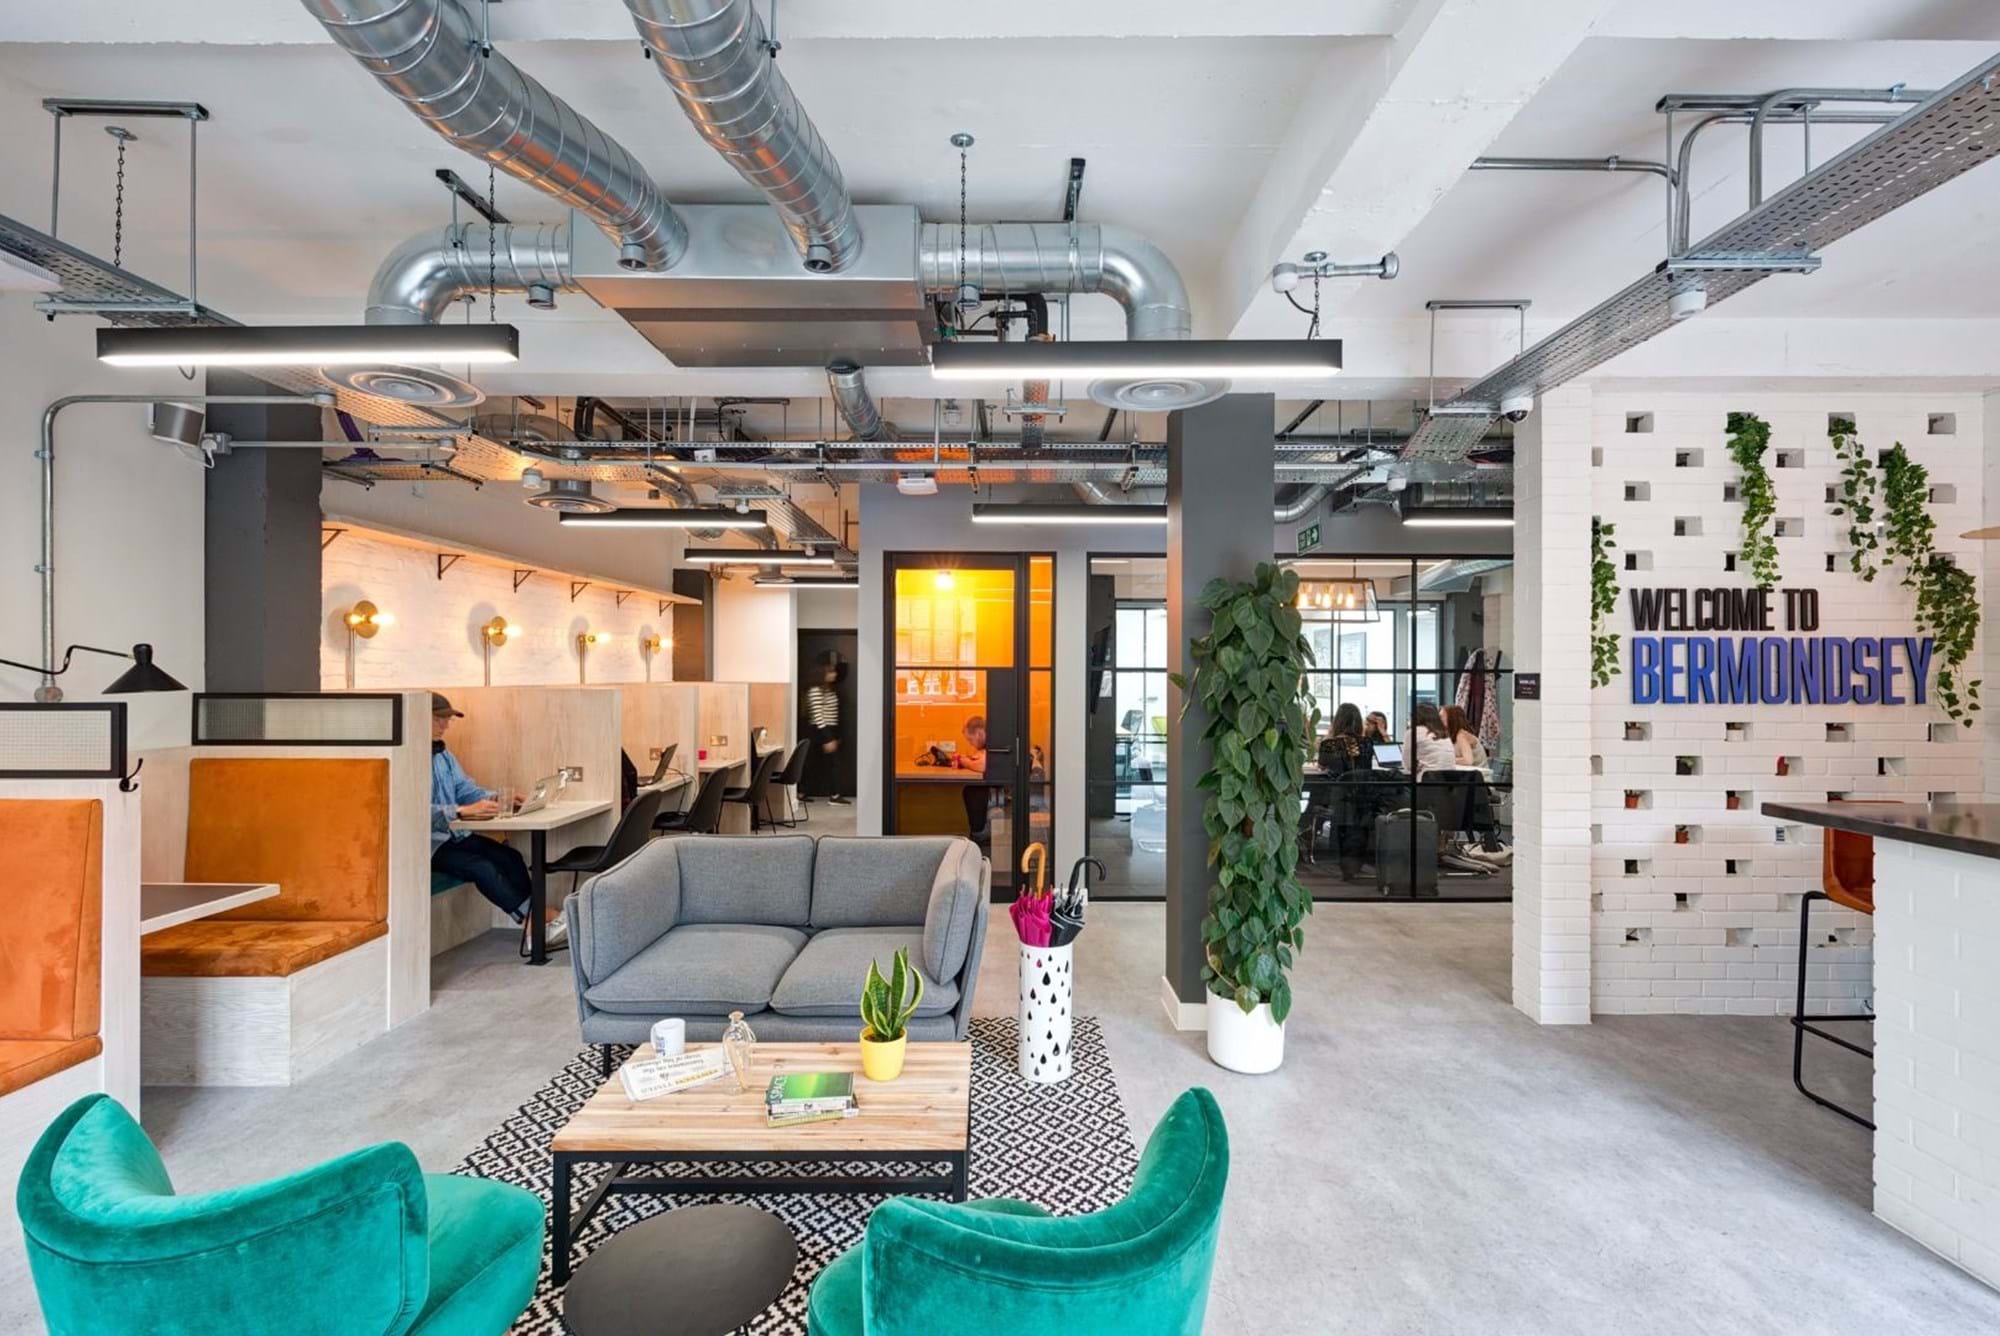 Modus Workspace office design, fit out and refurbishment - Worklife - Bermondsey - Worklife Bermondsey 02 highres sRGB.jpg